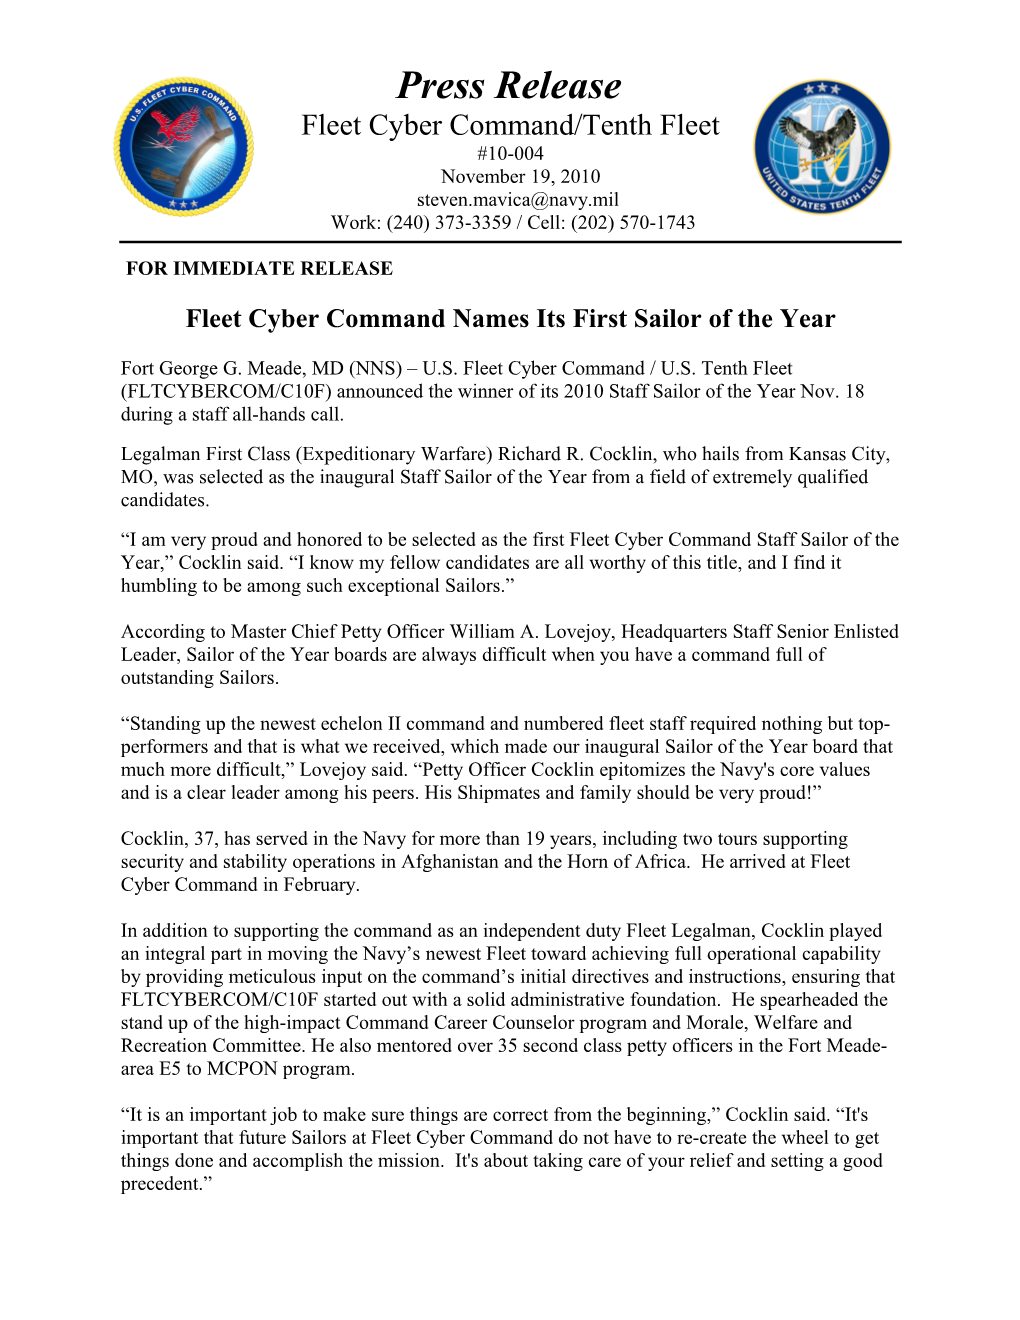 Fleet Cyber Command Names Its First Sailor of the Year